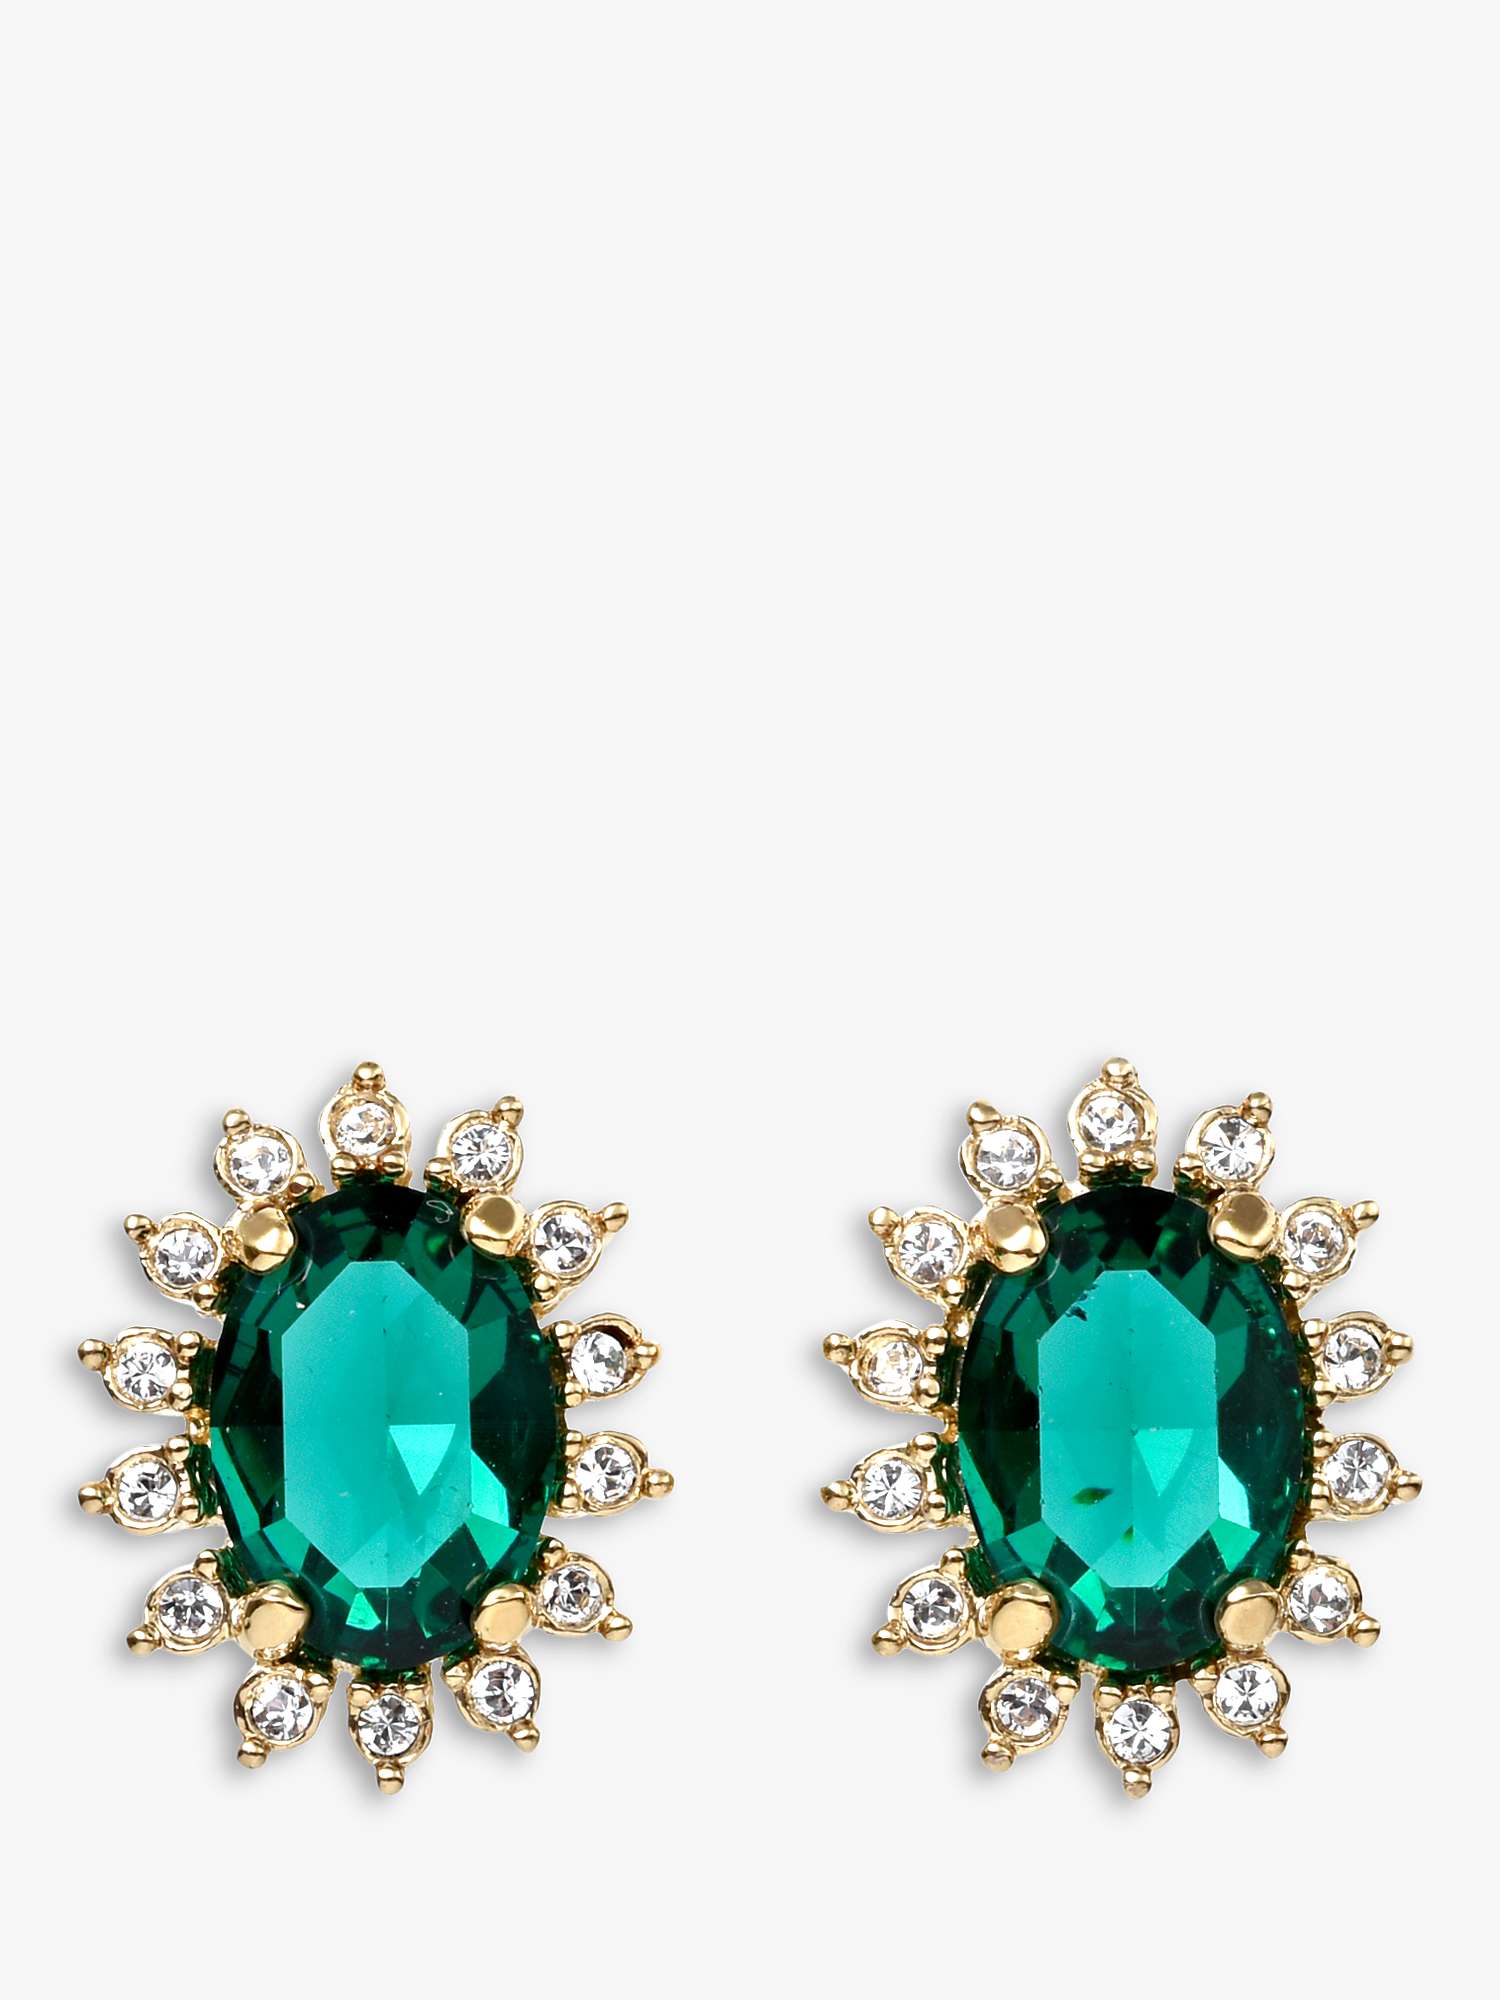 Buy Eclectica Vintage Swarovski Crystal Radial Clip-On Earrings, Dated Circa 1980s Online at johnlewis.com